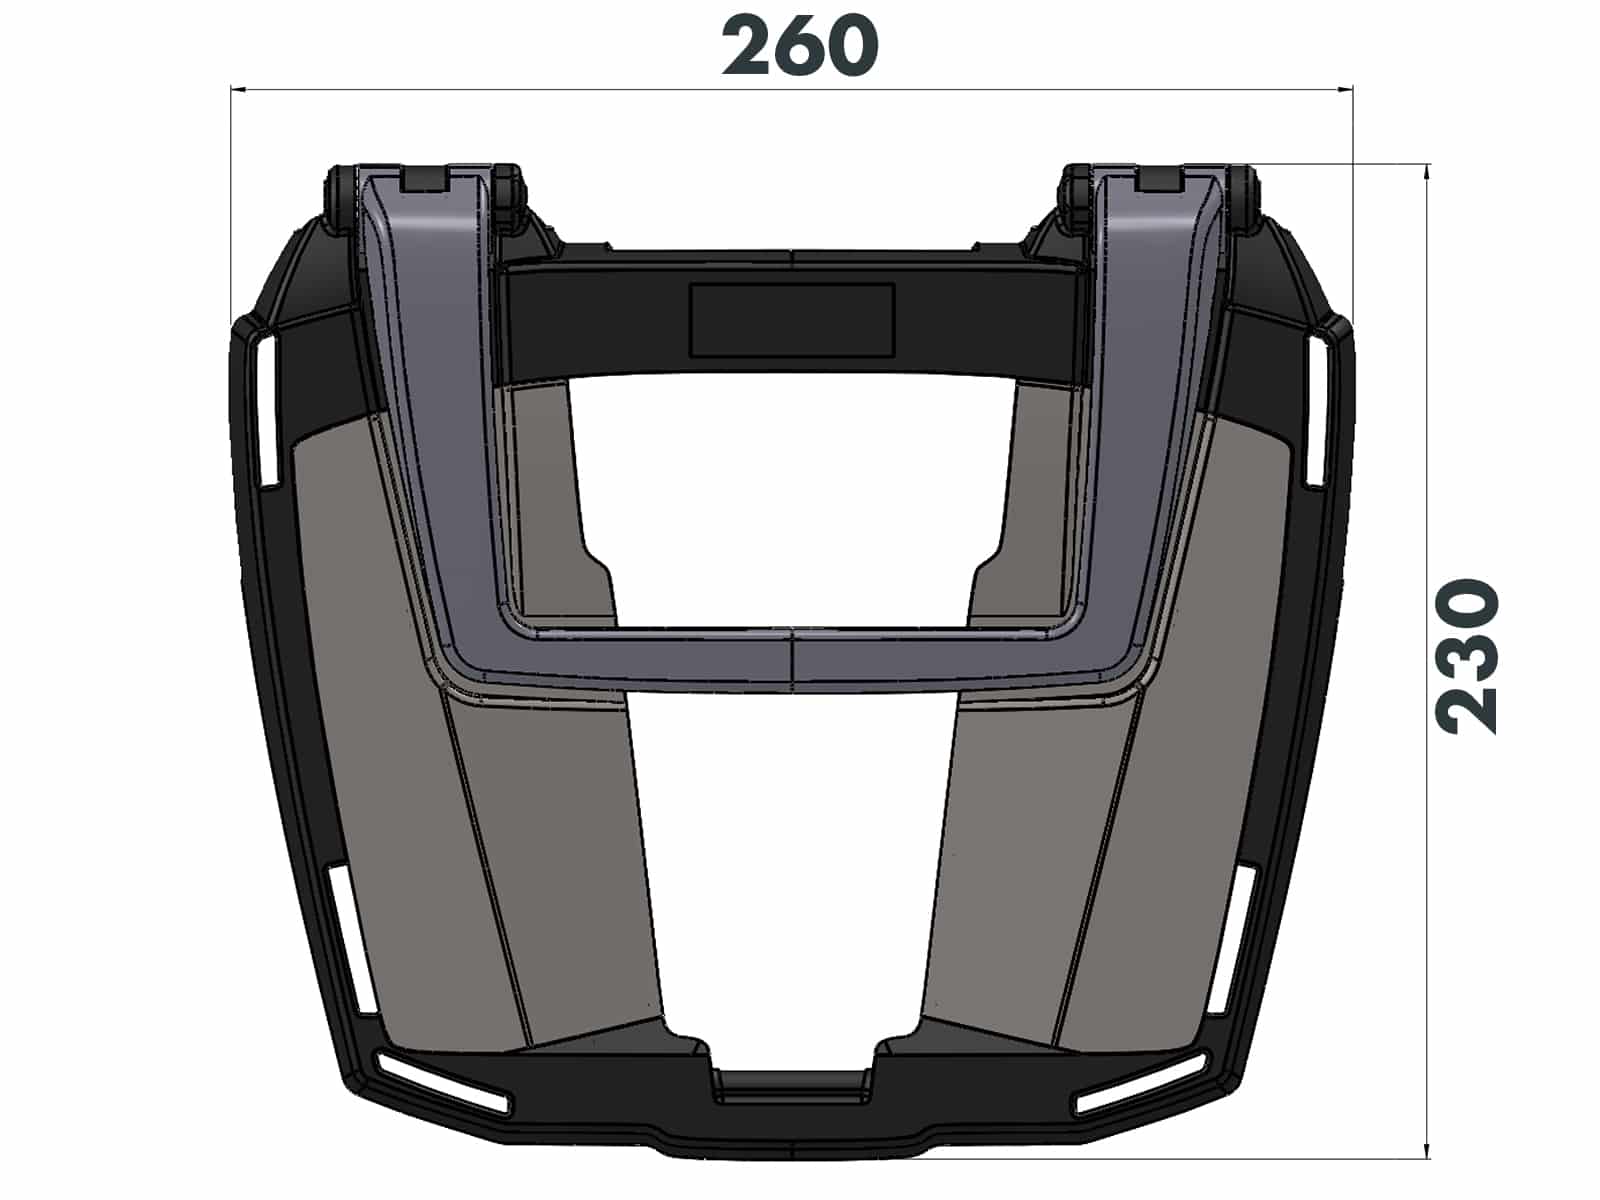 Easyrack topcasecarrier black for Kymco Xciting S 400i ABS (2019-)